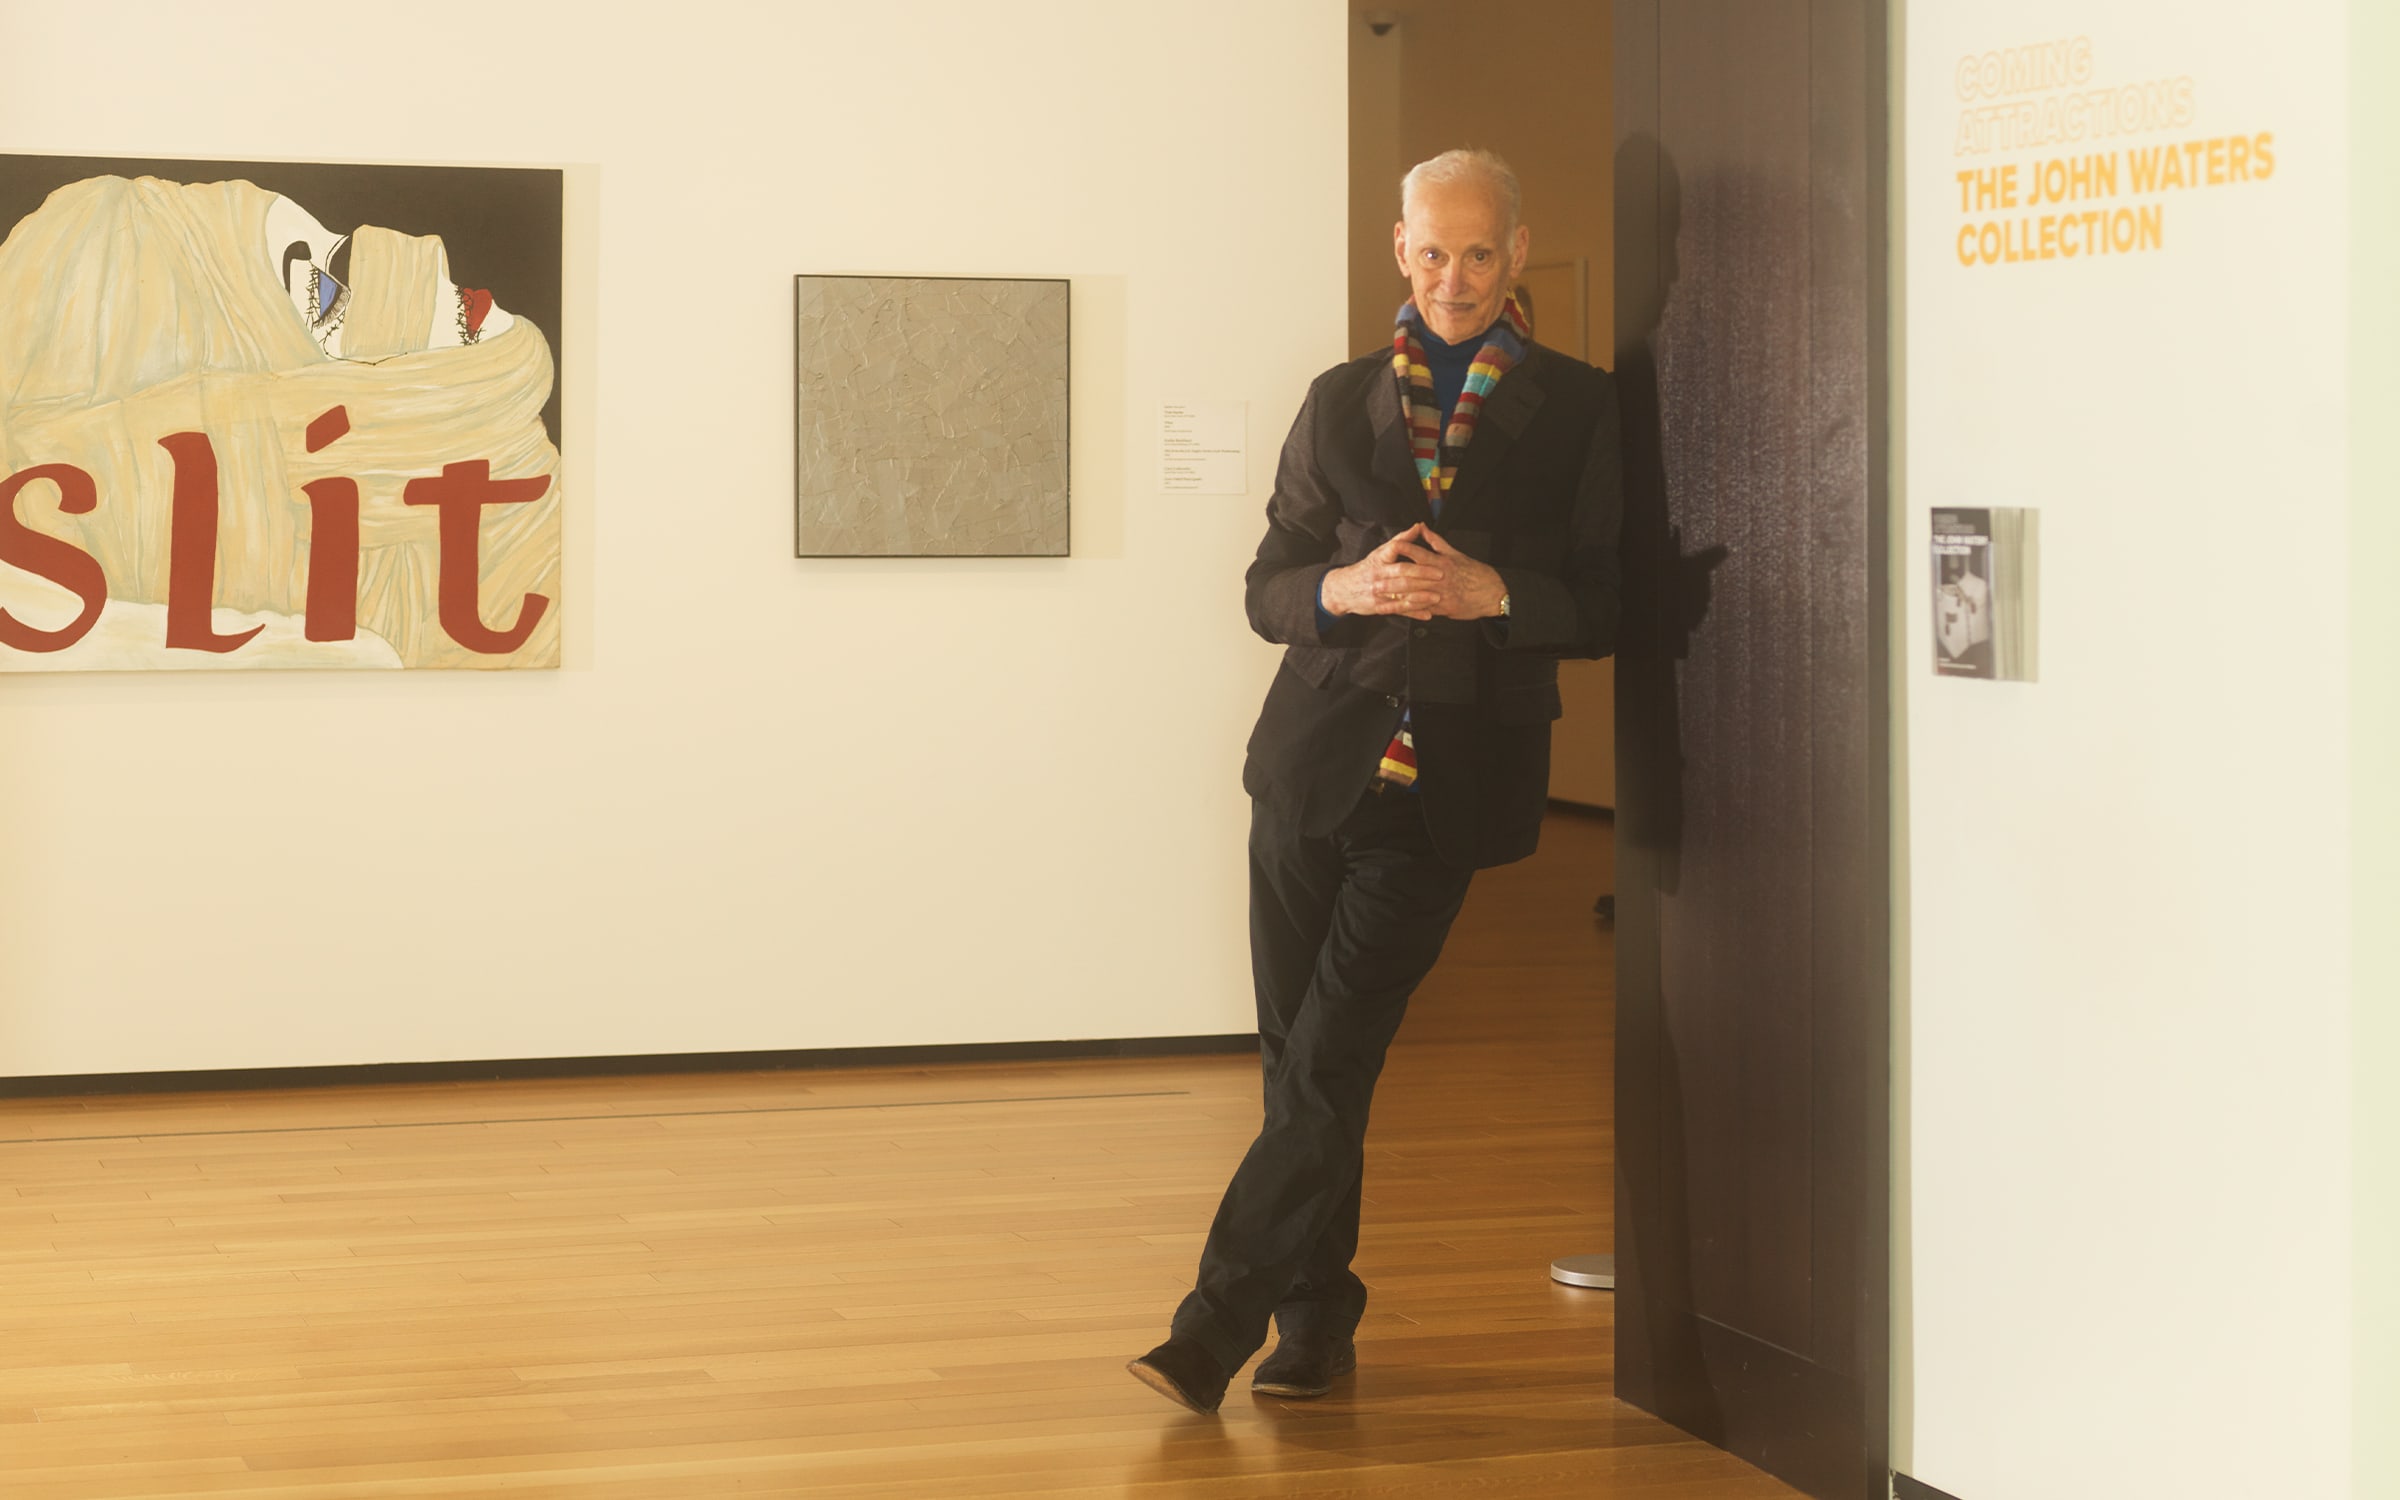 John Waters at the entrance of 'Coming Attractions', the exhibition of his collection at the Baltimore Museum of Art, January 2023. In the background are Kathe Burkhart's Slit: from the Liz Taylor Series (Ash Wednesday) (1992) and Tom Sachs's What (1995). Photograph by Matt Grubb for Art Basel.